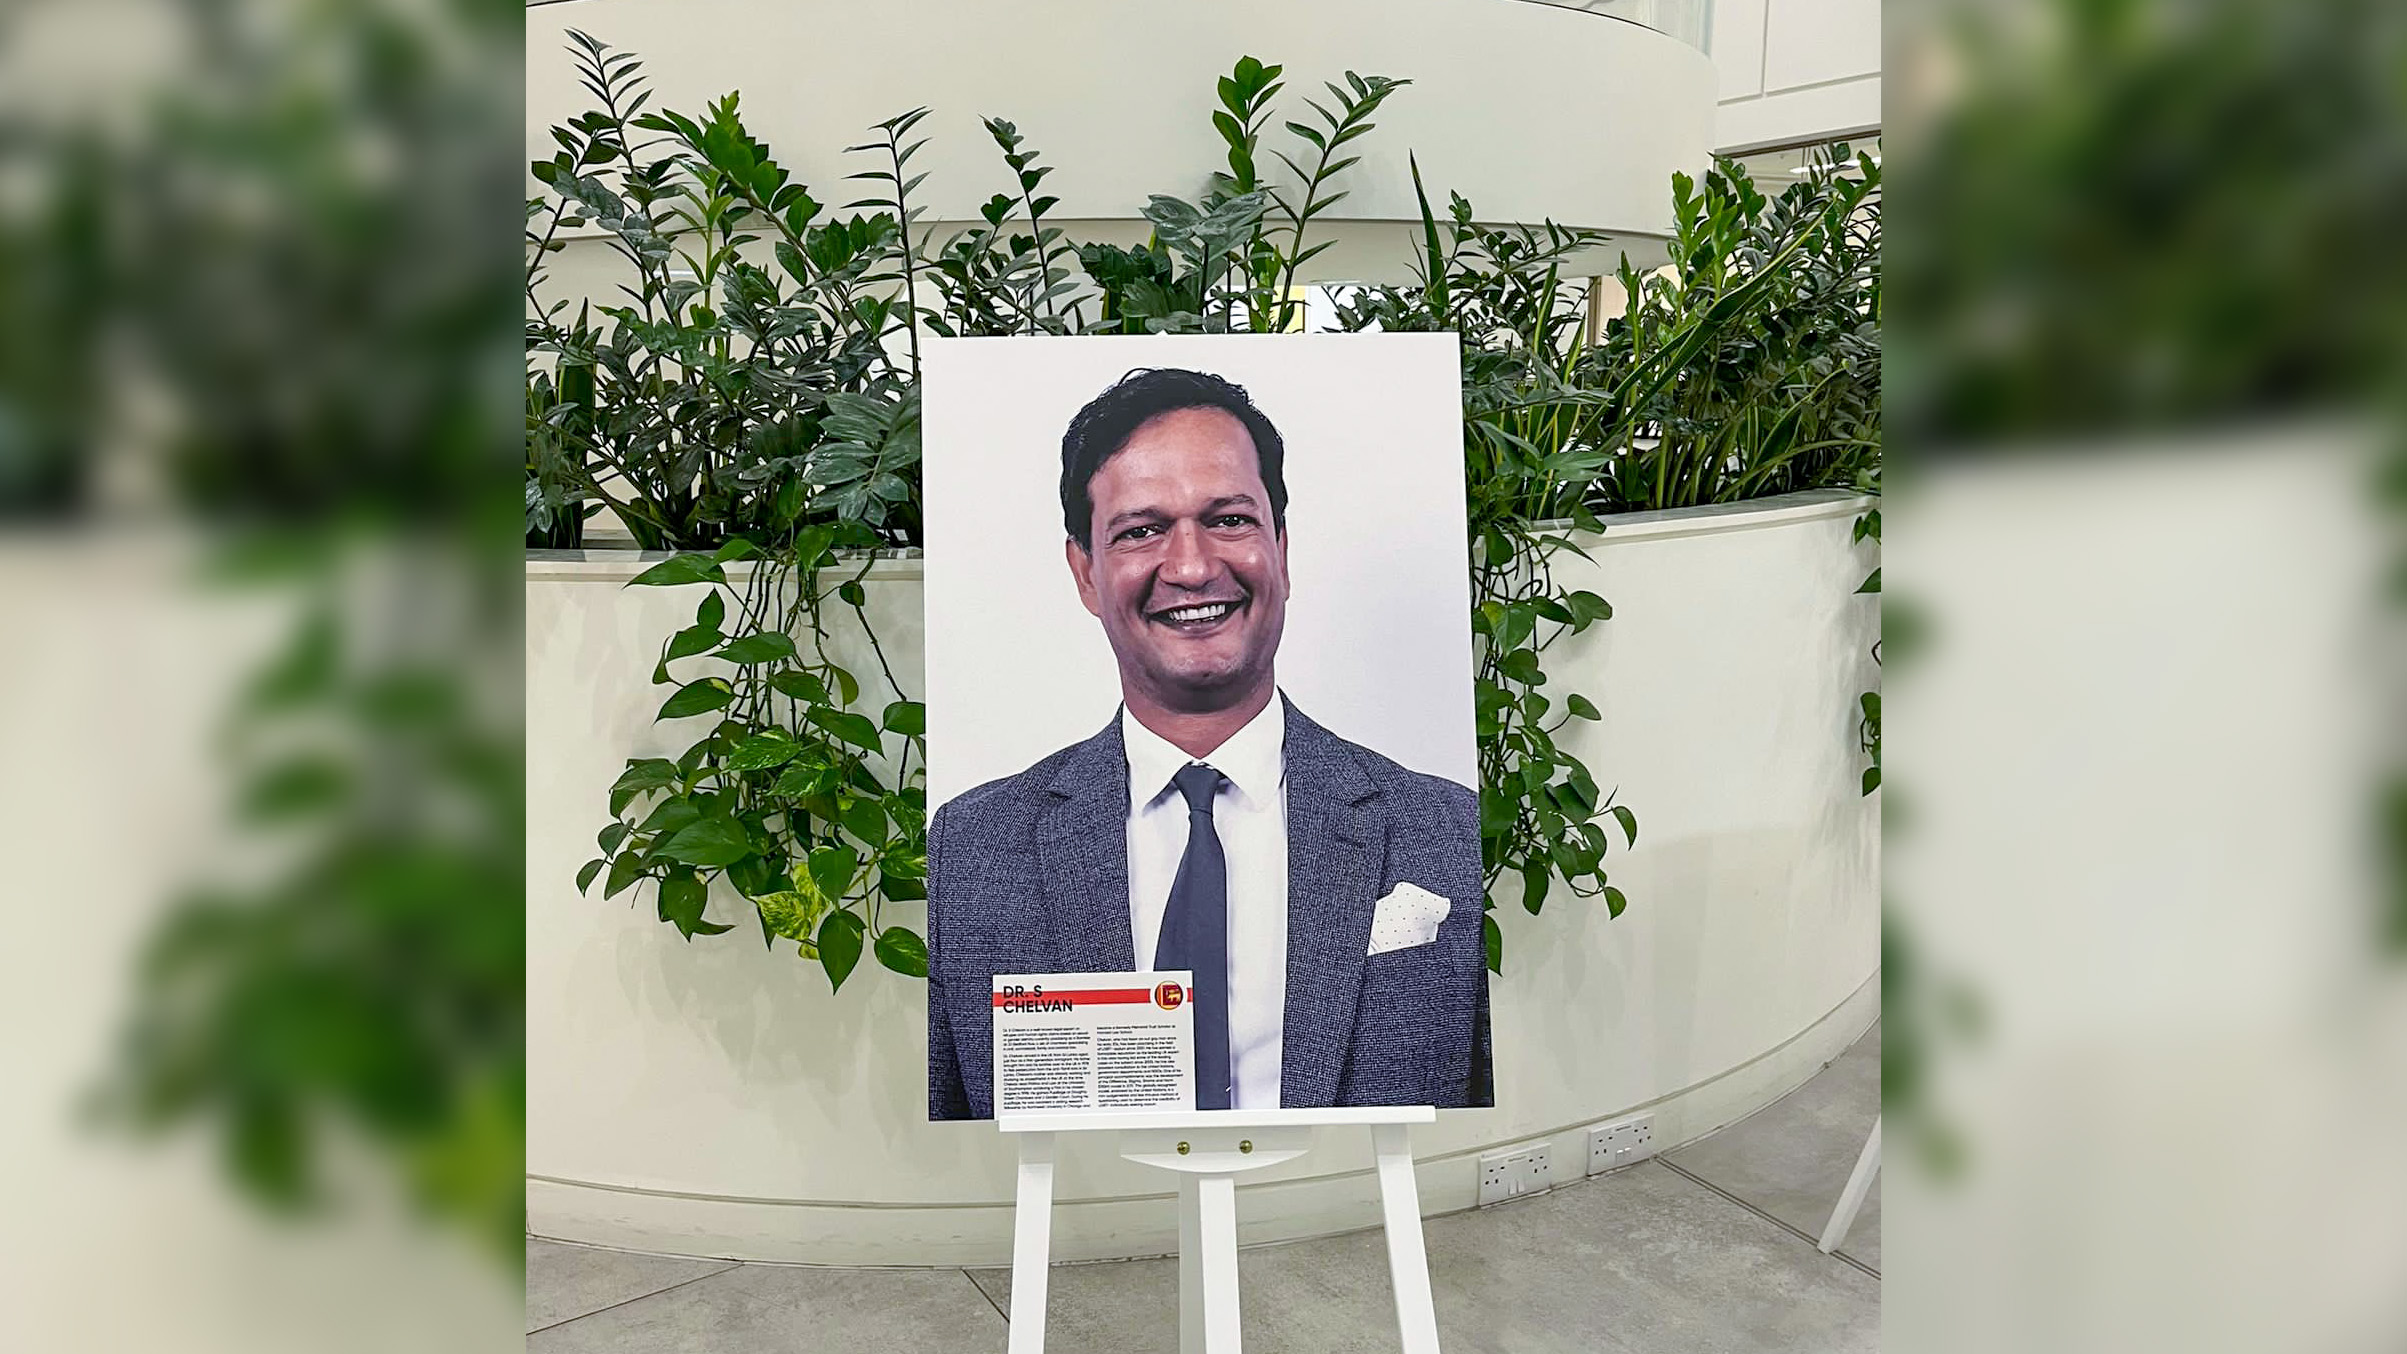 Portrait of Dr S Chelvan included in the ‘South Asians in Law Network’ Diwali photo exhibition